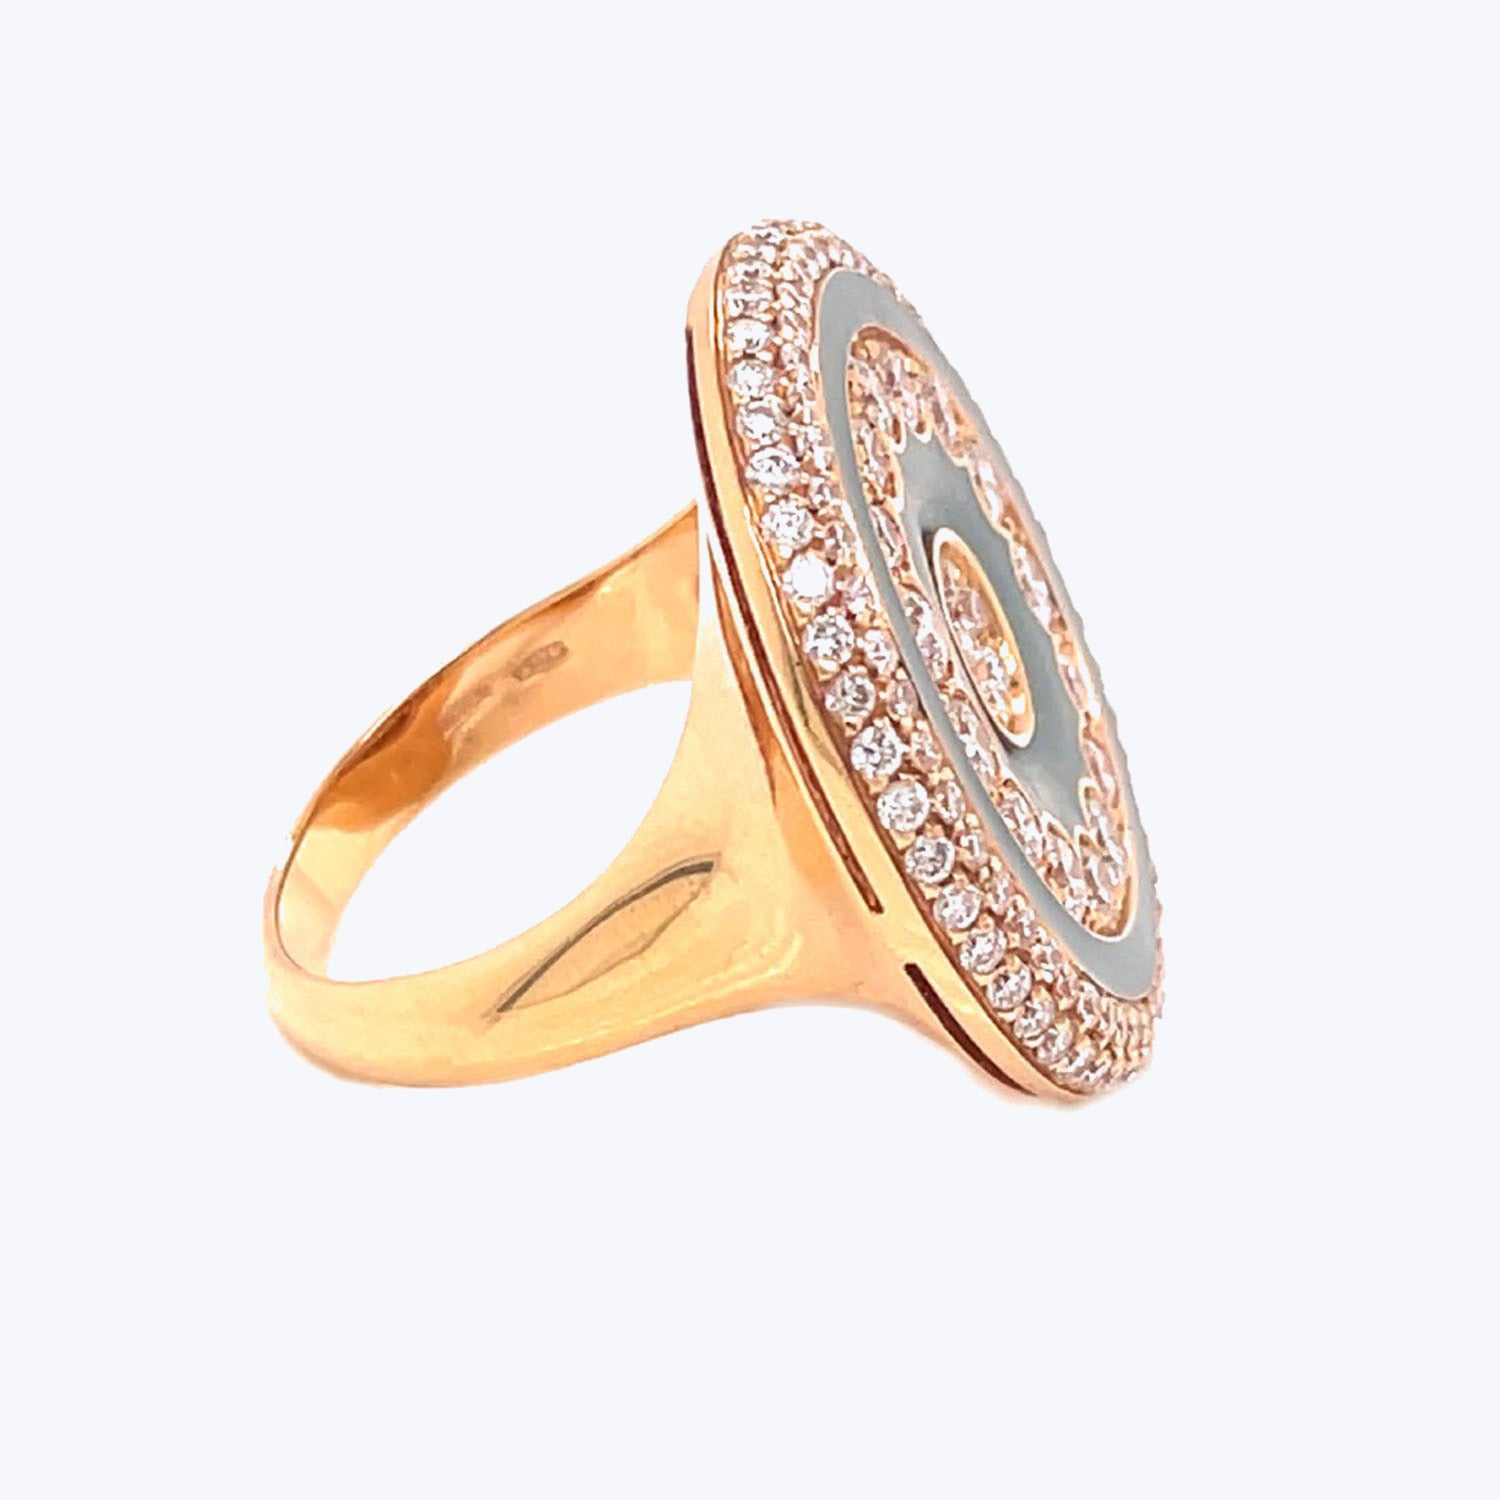 Stunning rose gold ring adorned with sparkling diamonds in halo setting